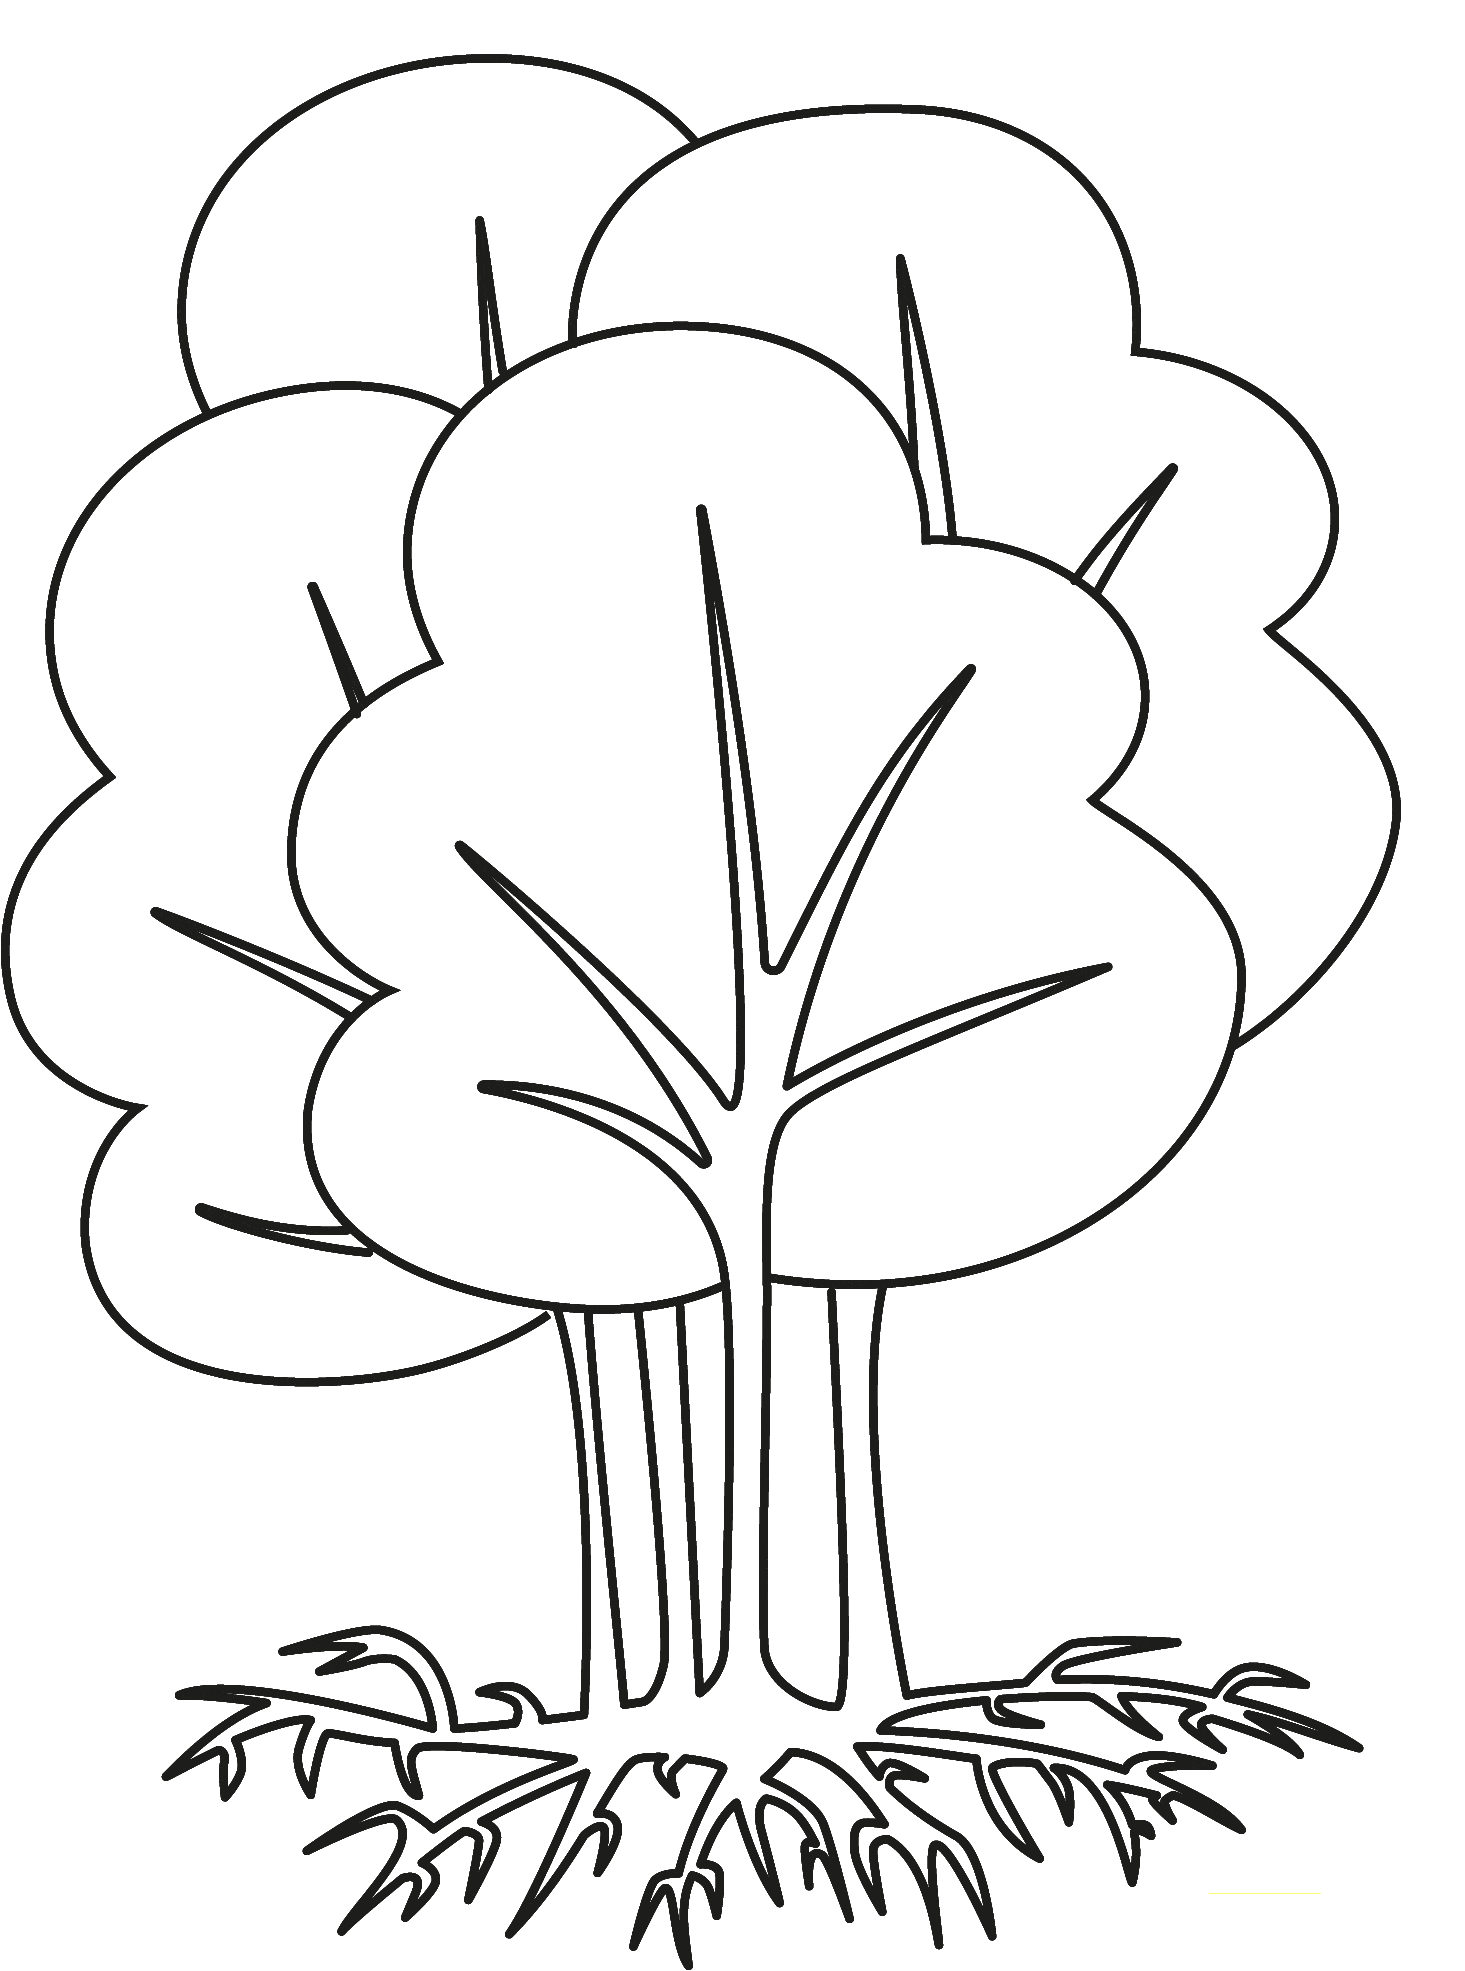 Gif of a forest with strong roots in a frame representing SME small medium enterprise business growth branding positioning